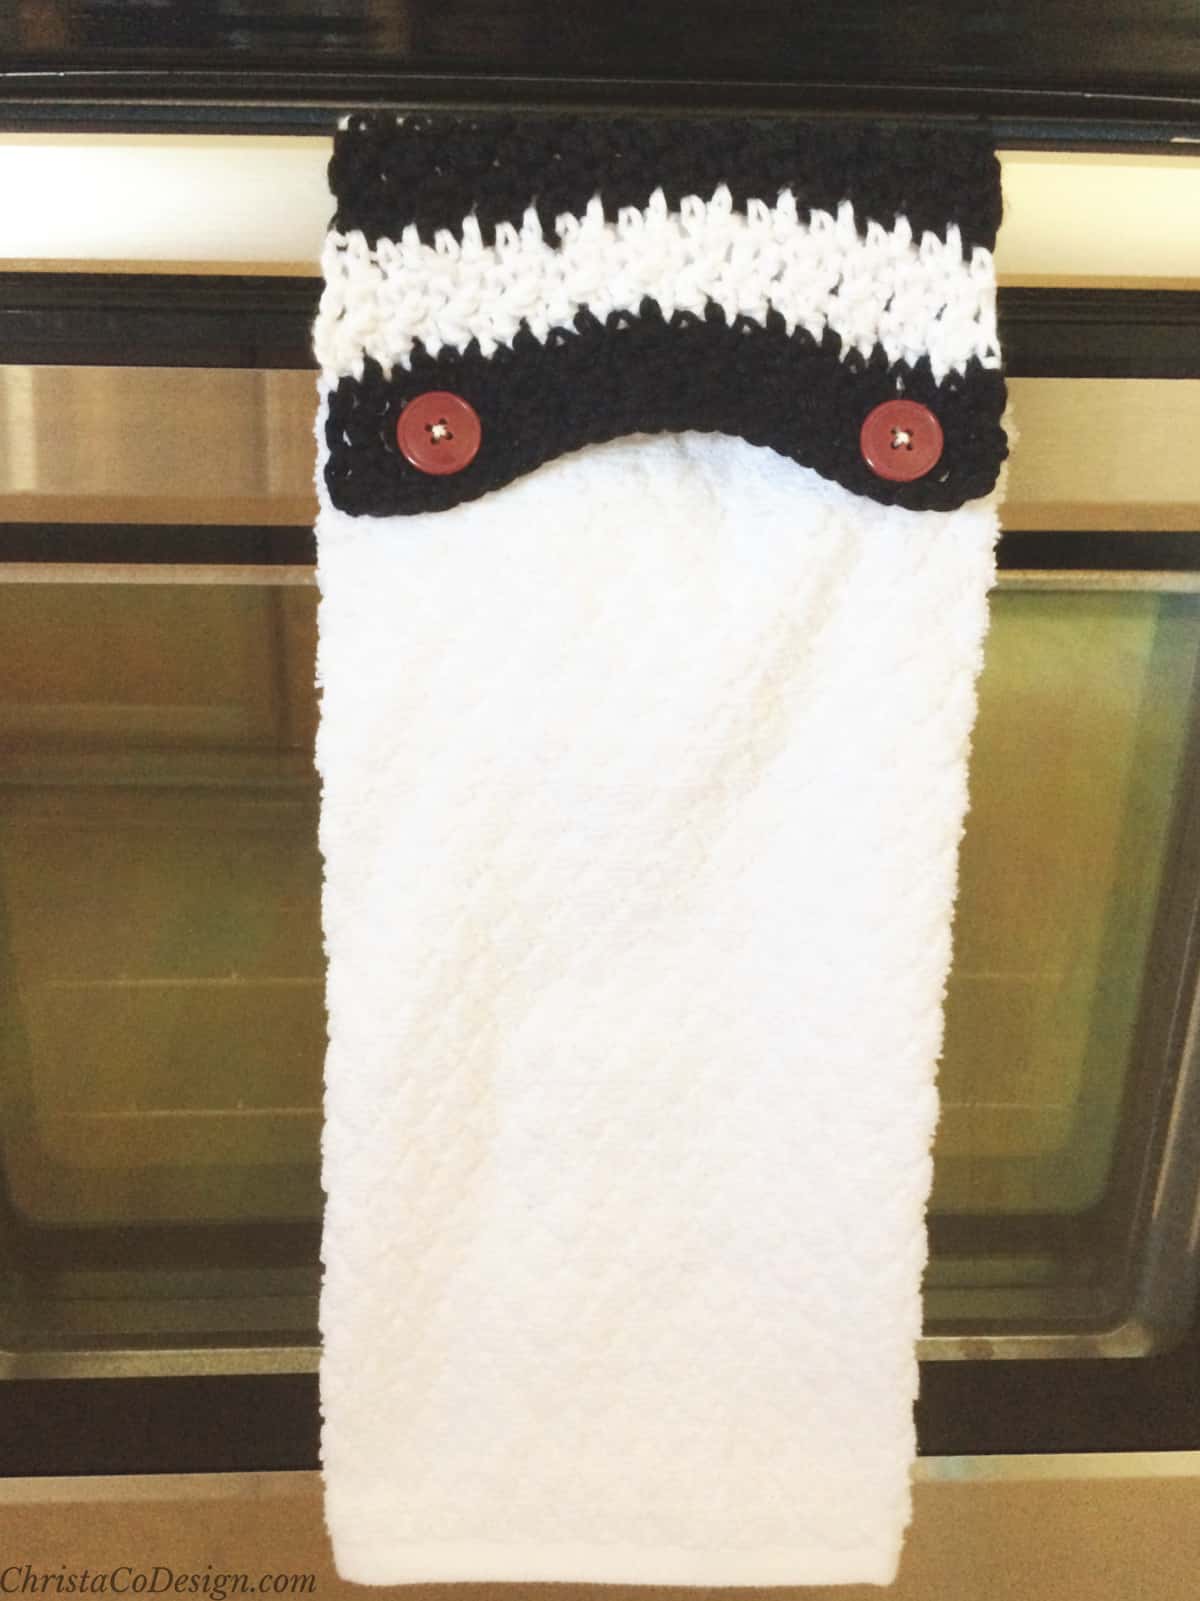 Black and white crochet towel topper hanging on stove.